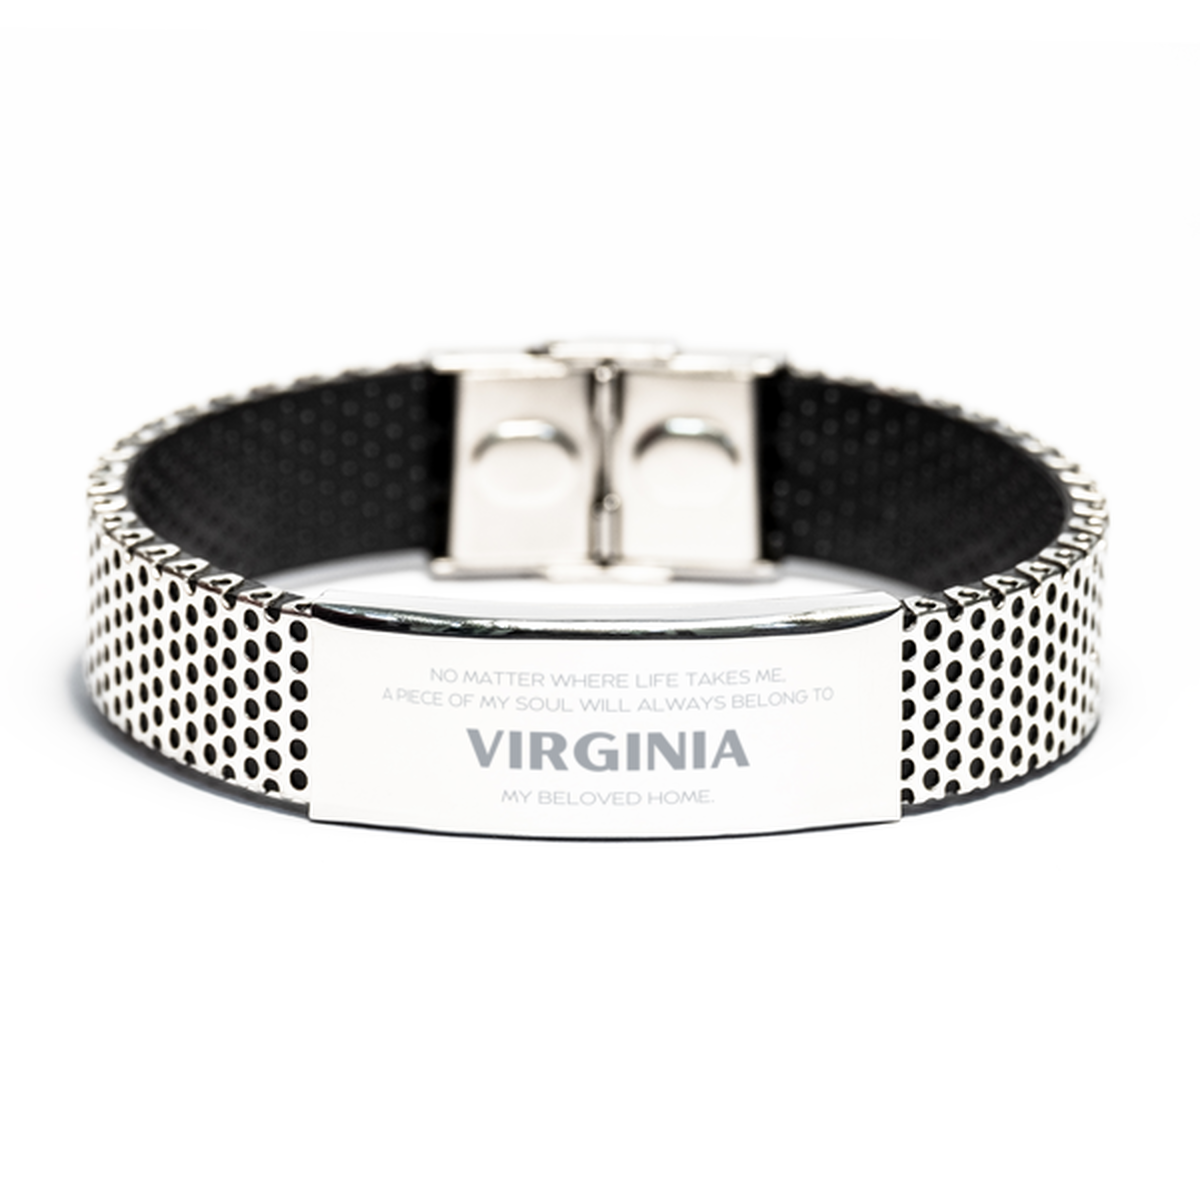 Love Virginia State Gifts, My soul will always belong to Virginia, Proud Stainless Steel Bracelet, Birthday Unique Gifts For Virginia Men, Women, Friends